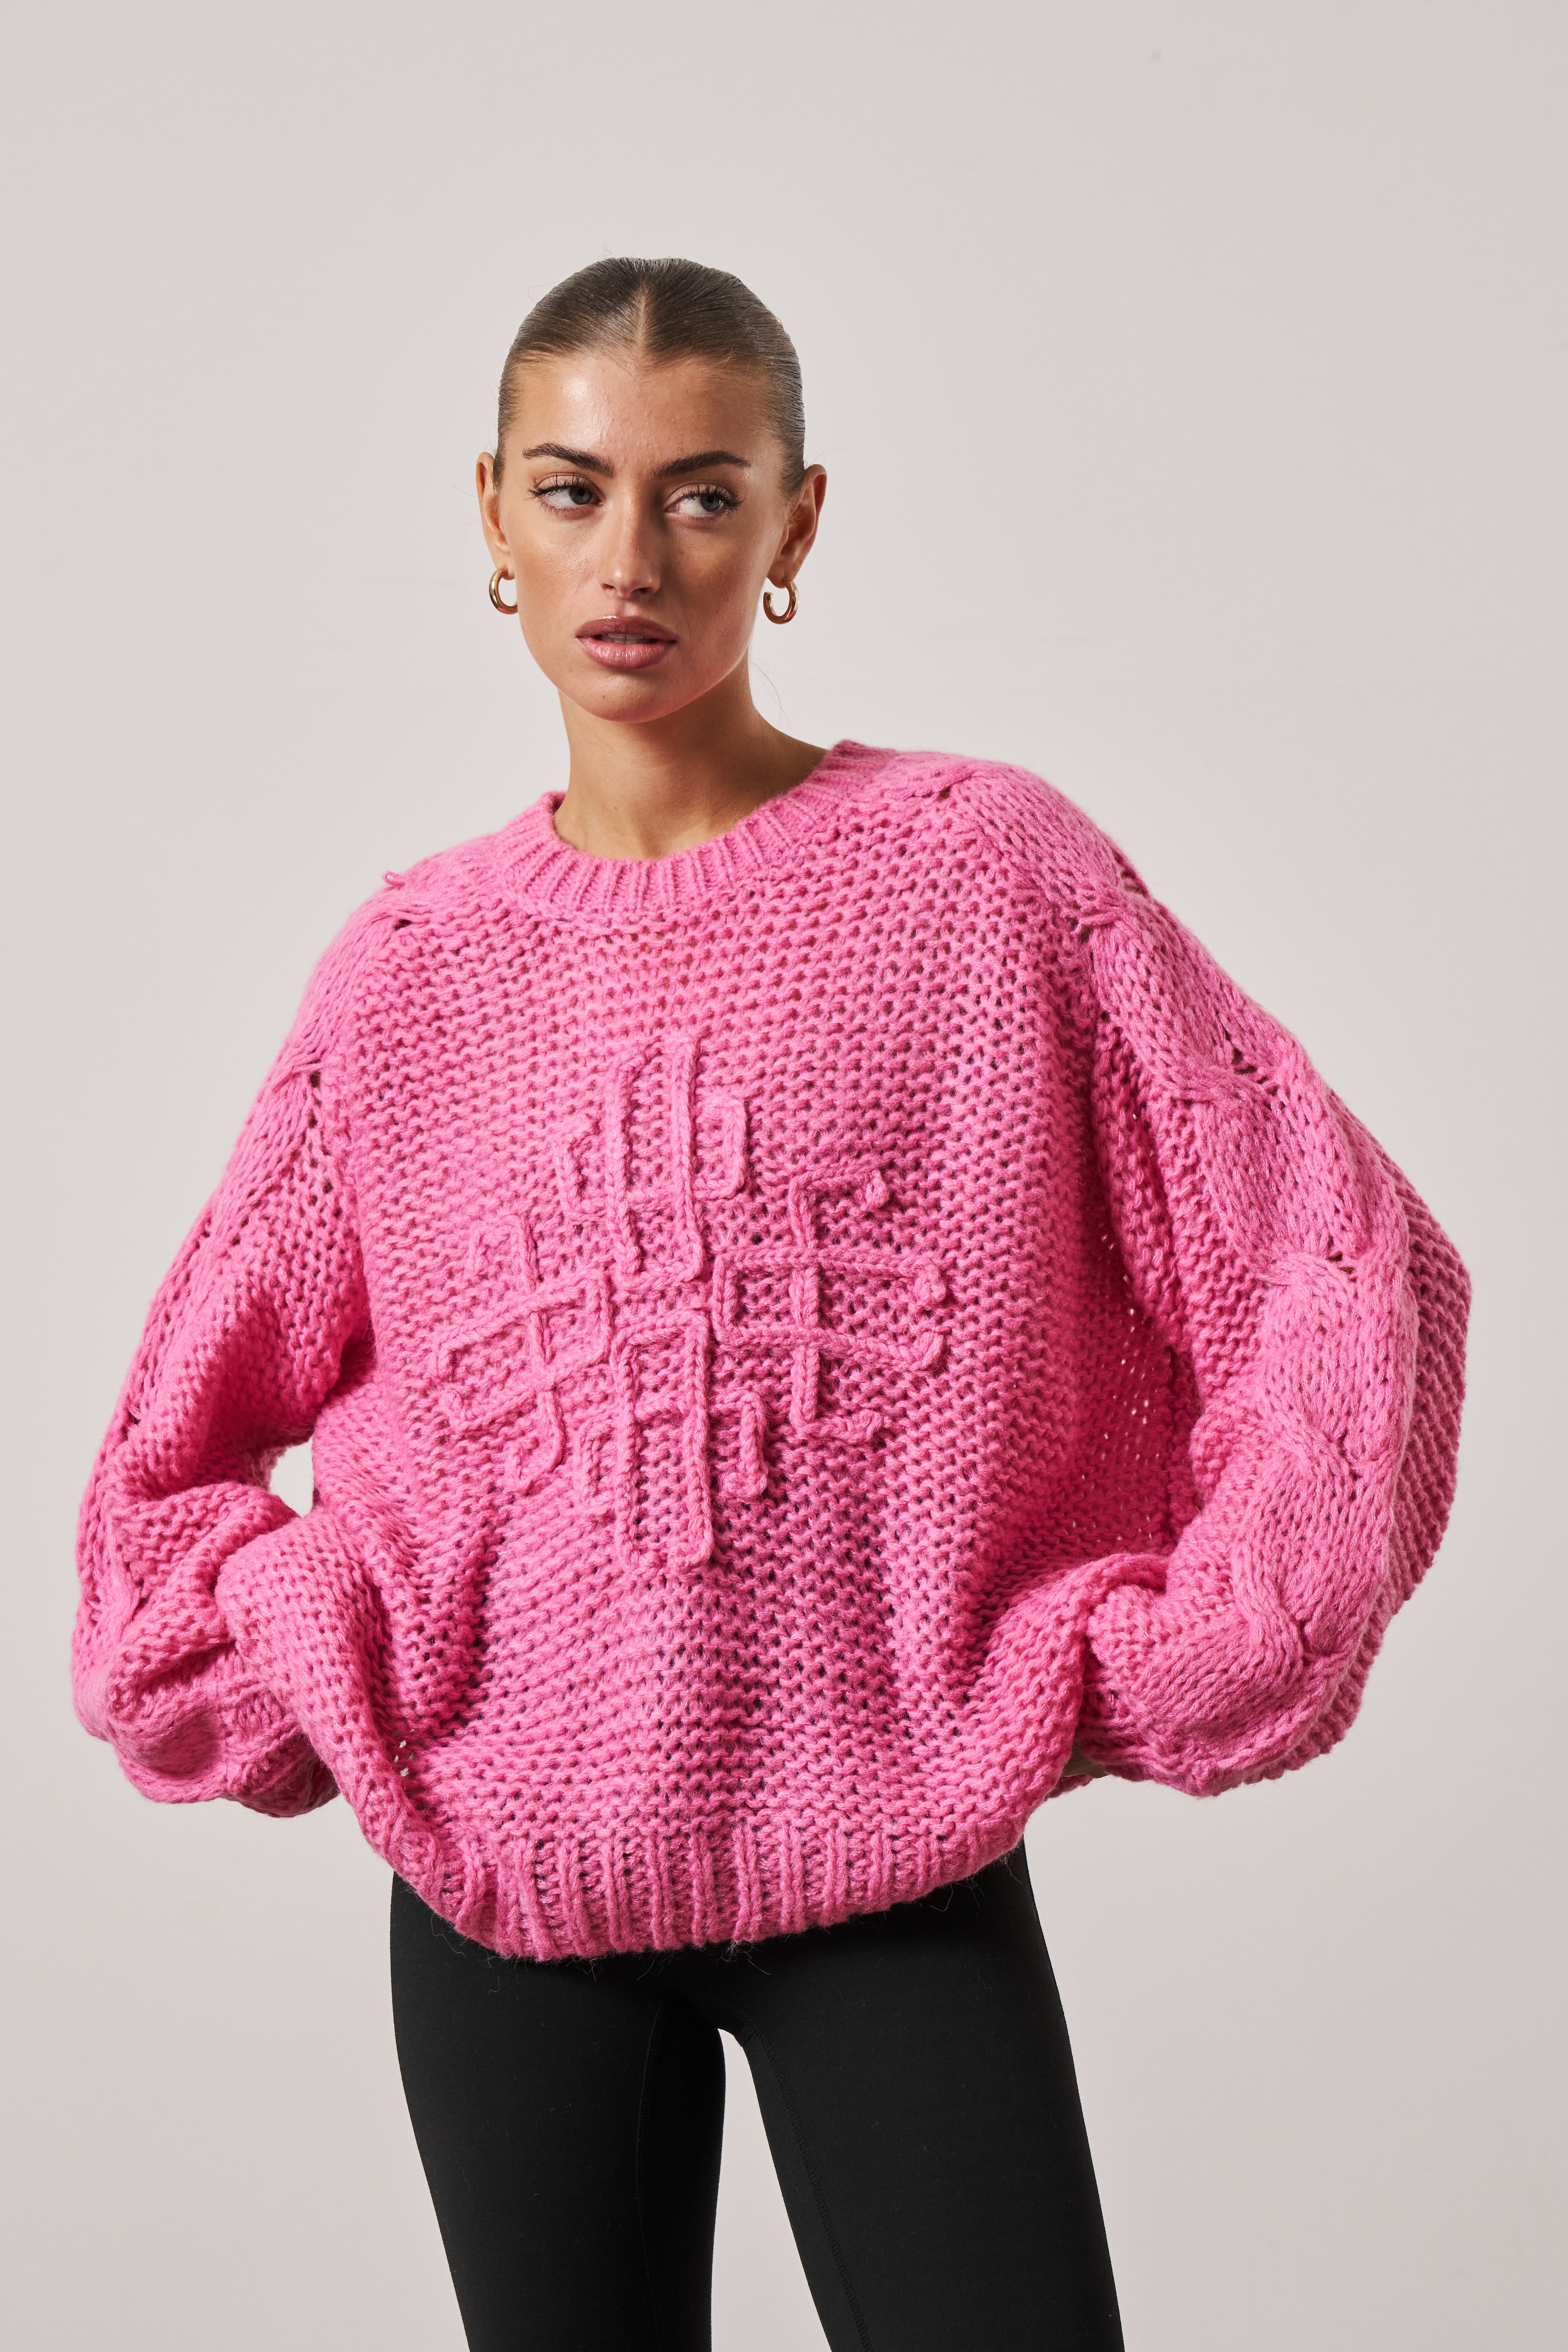 EMBLEM OVERSIZED KNIT JUMPER - PINK – The Couture Club